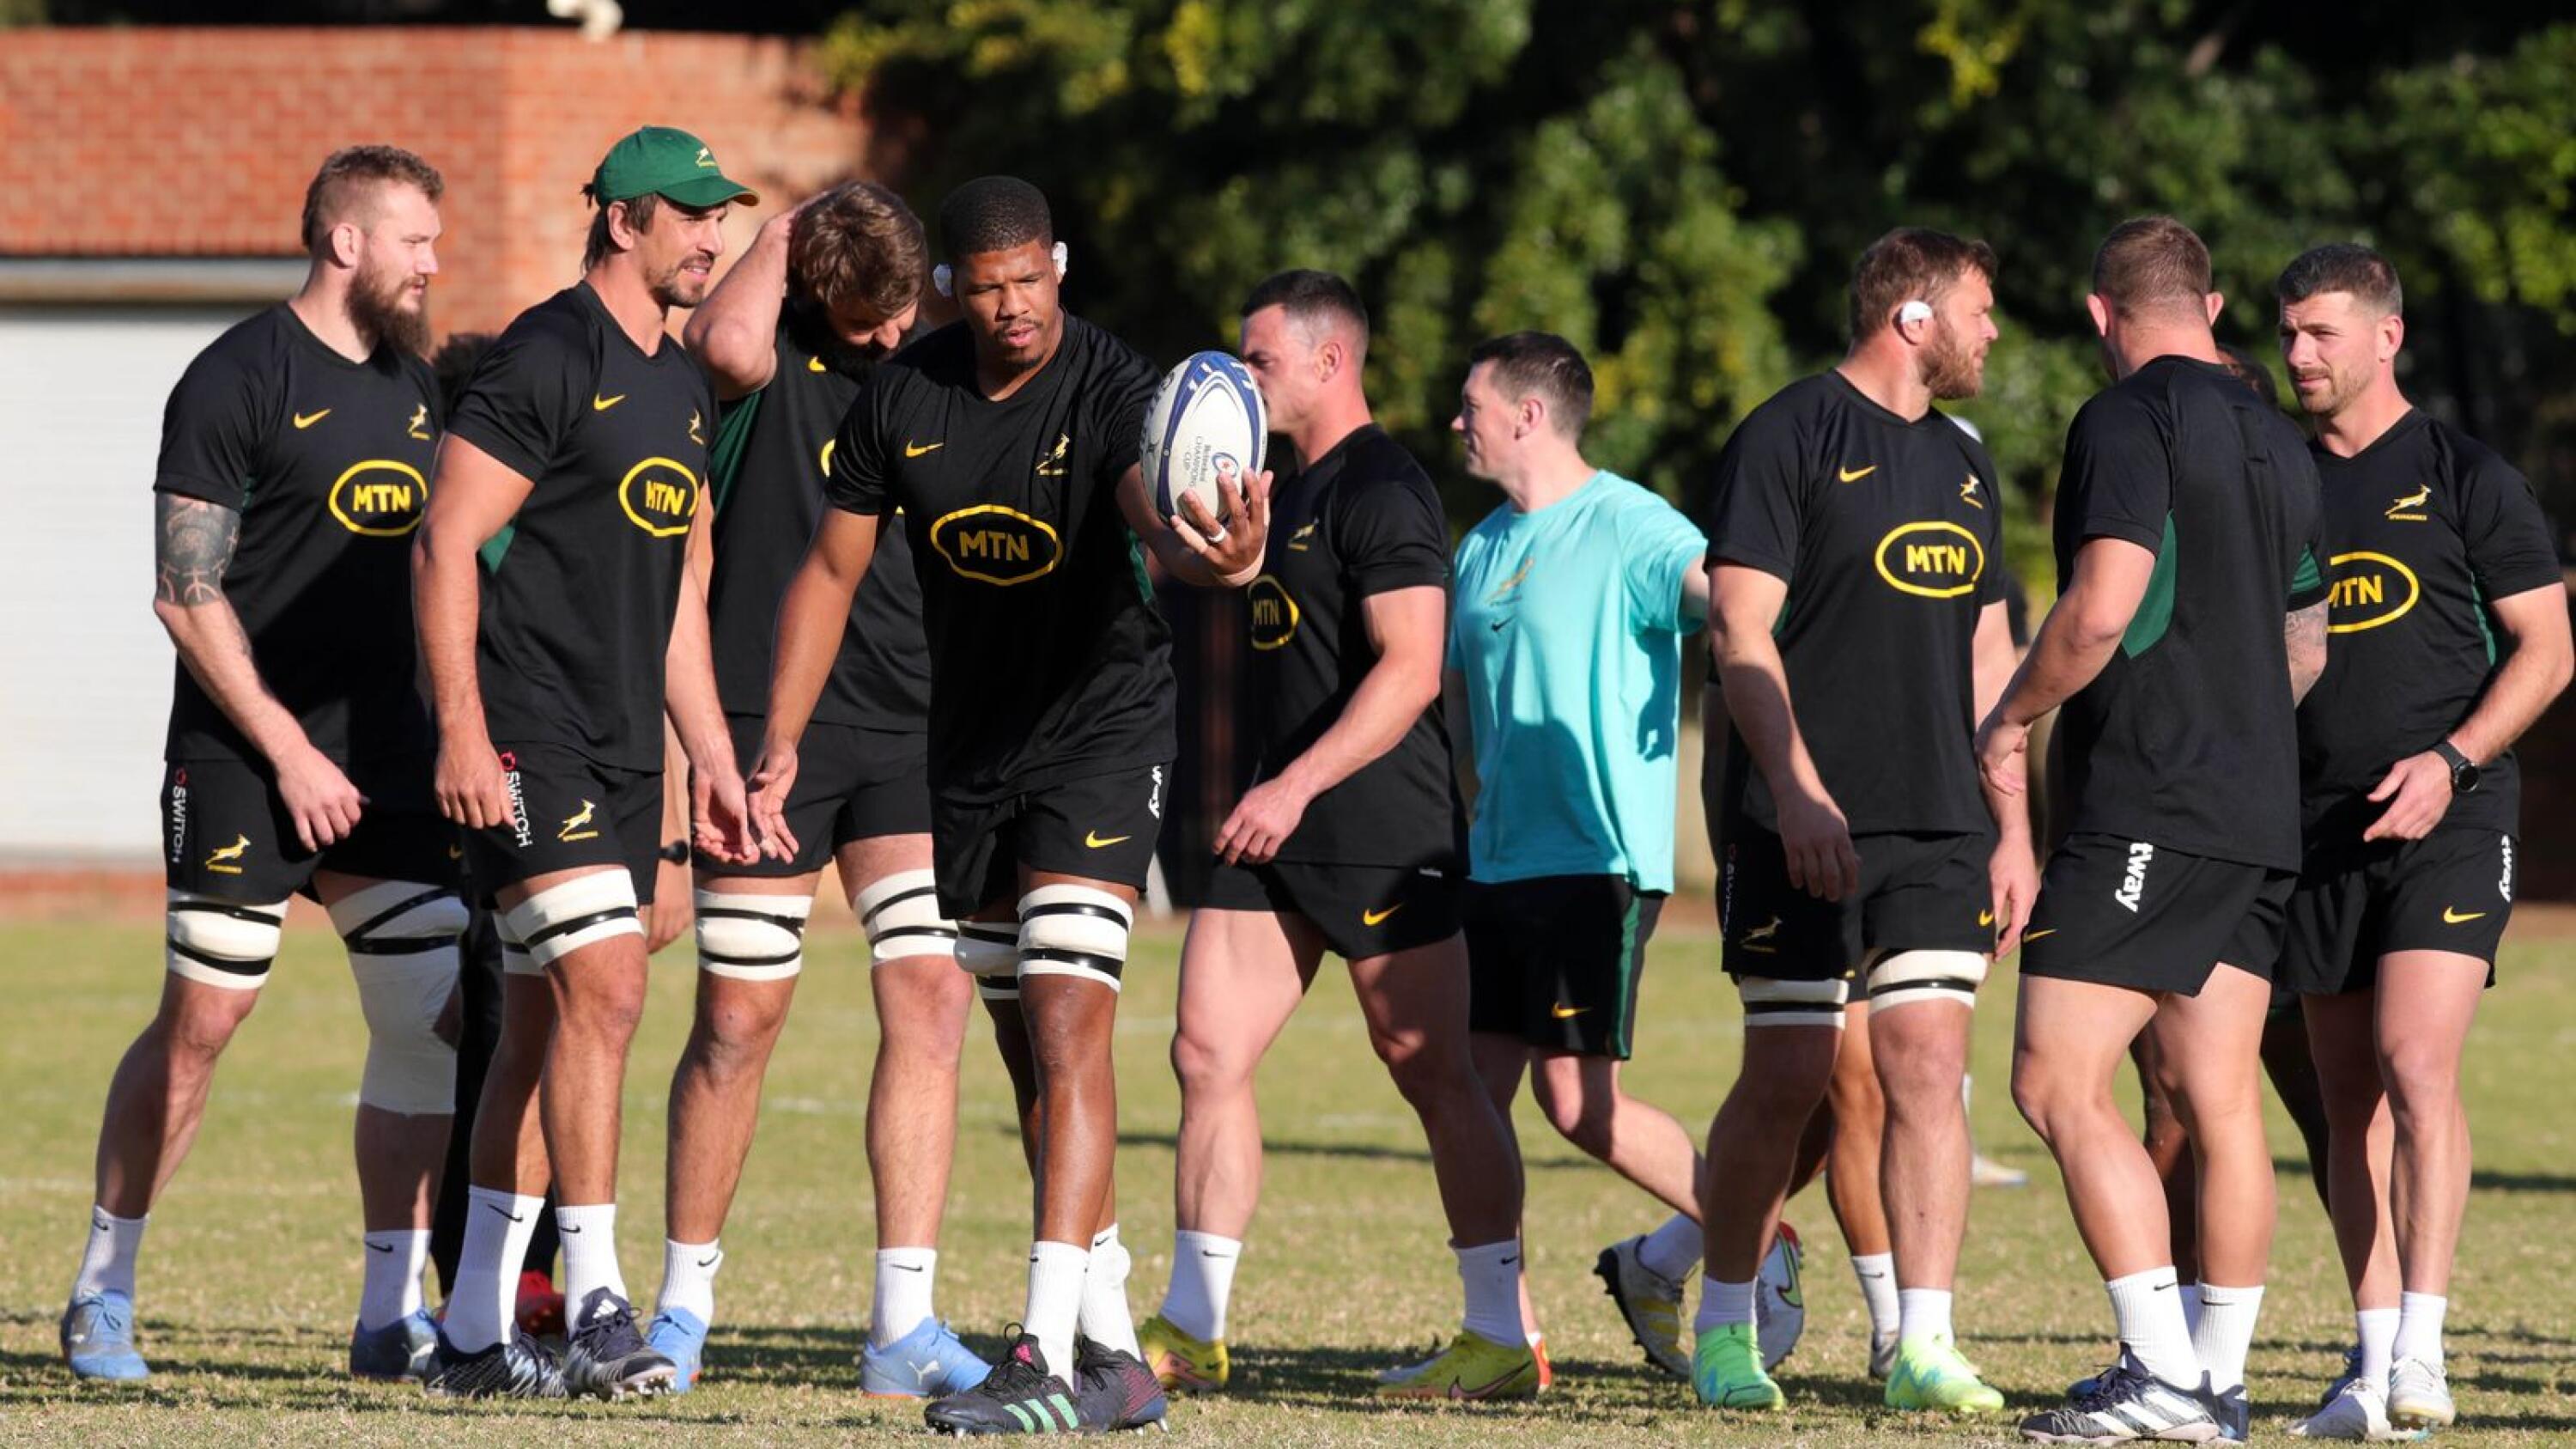 Springbok players take part in a training session ahead of the 2023 Rugby Championship